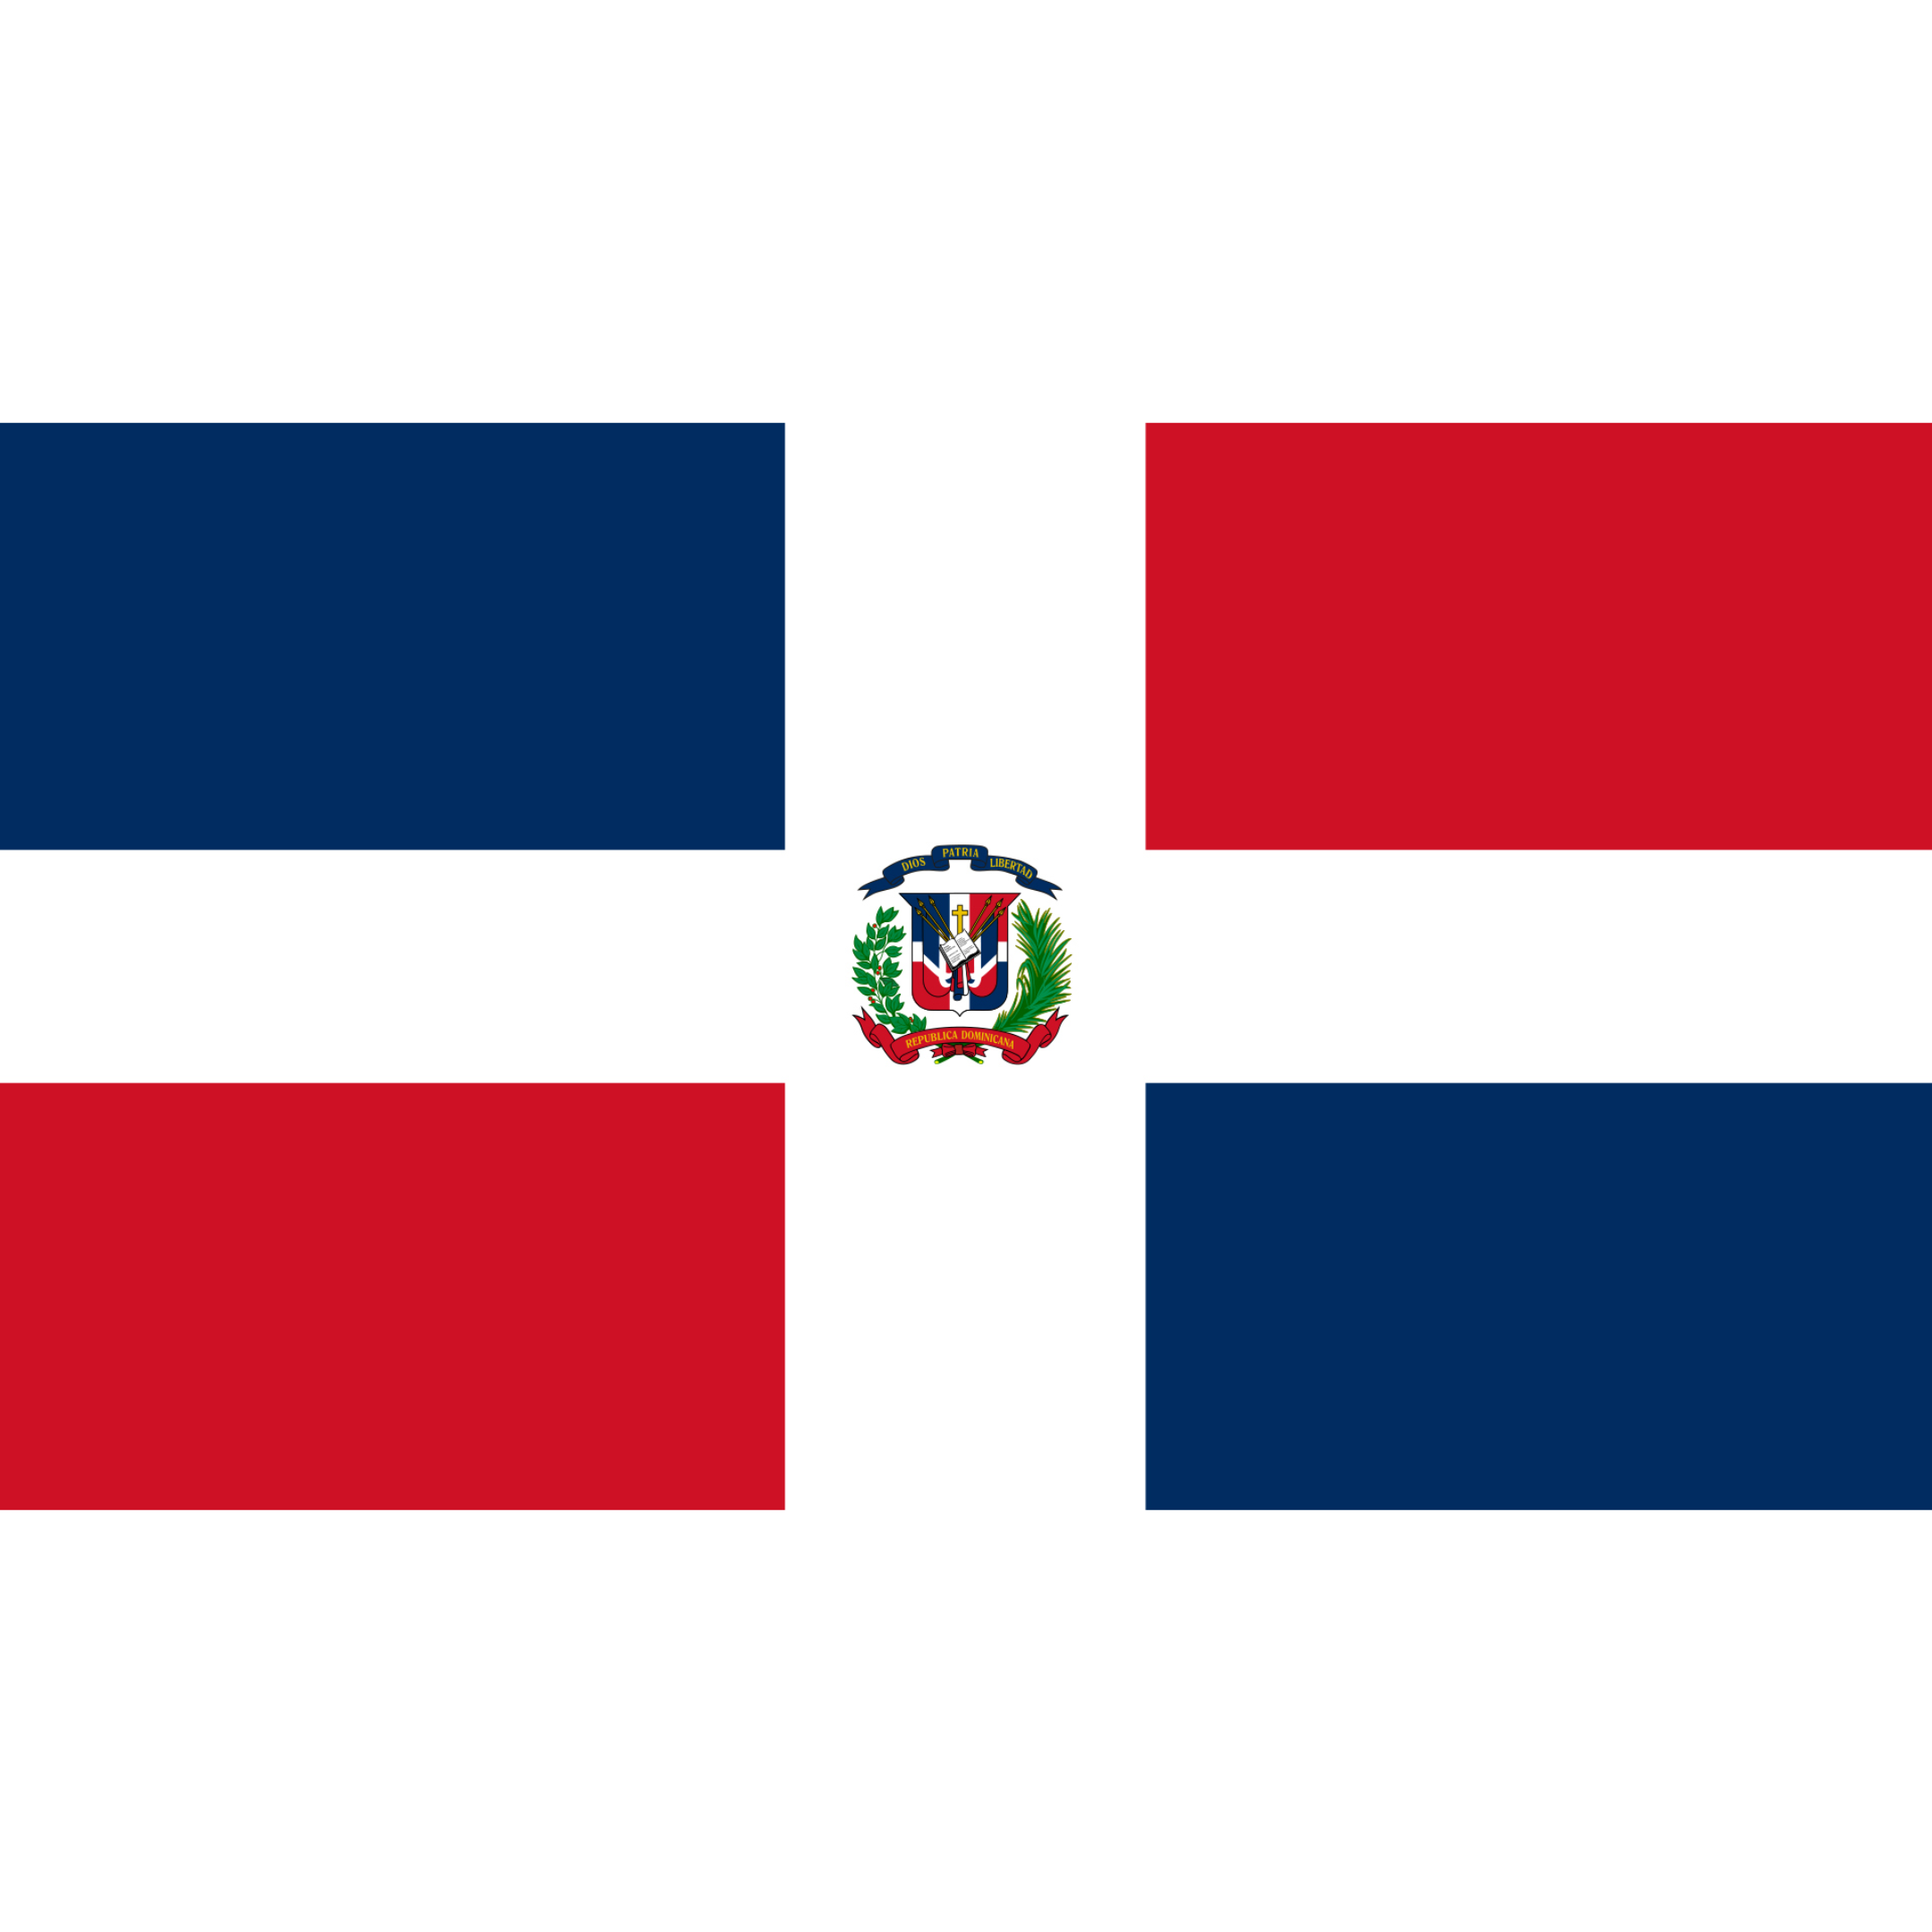 Dominican Republic's flag has a white cross dividing it into four blue and red rectangles, with a coat of arms in the centre.